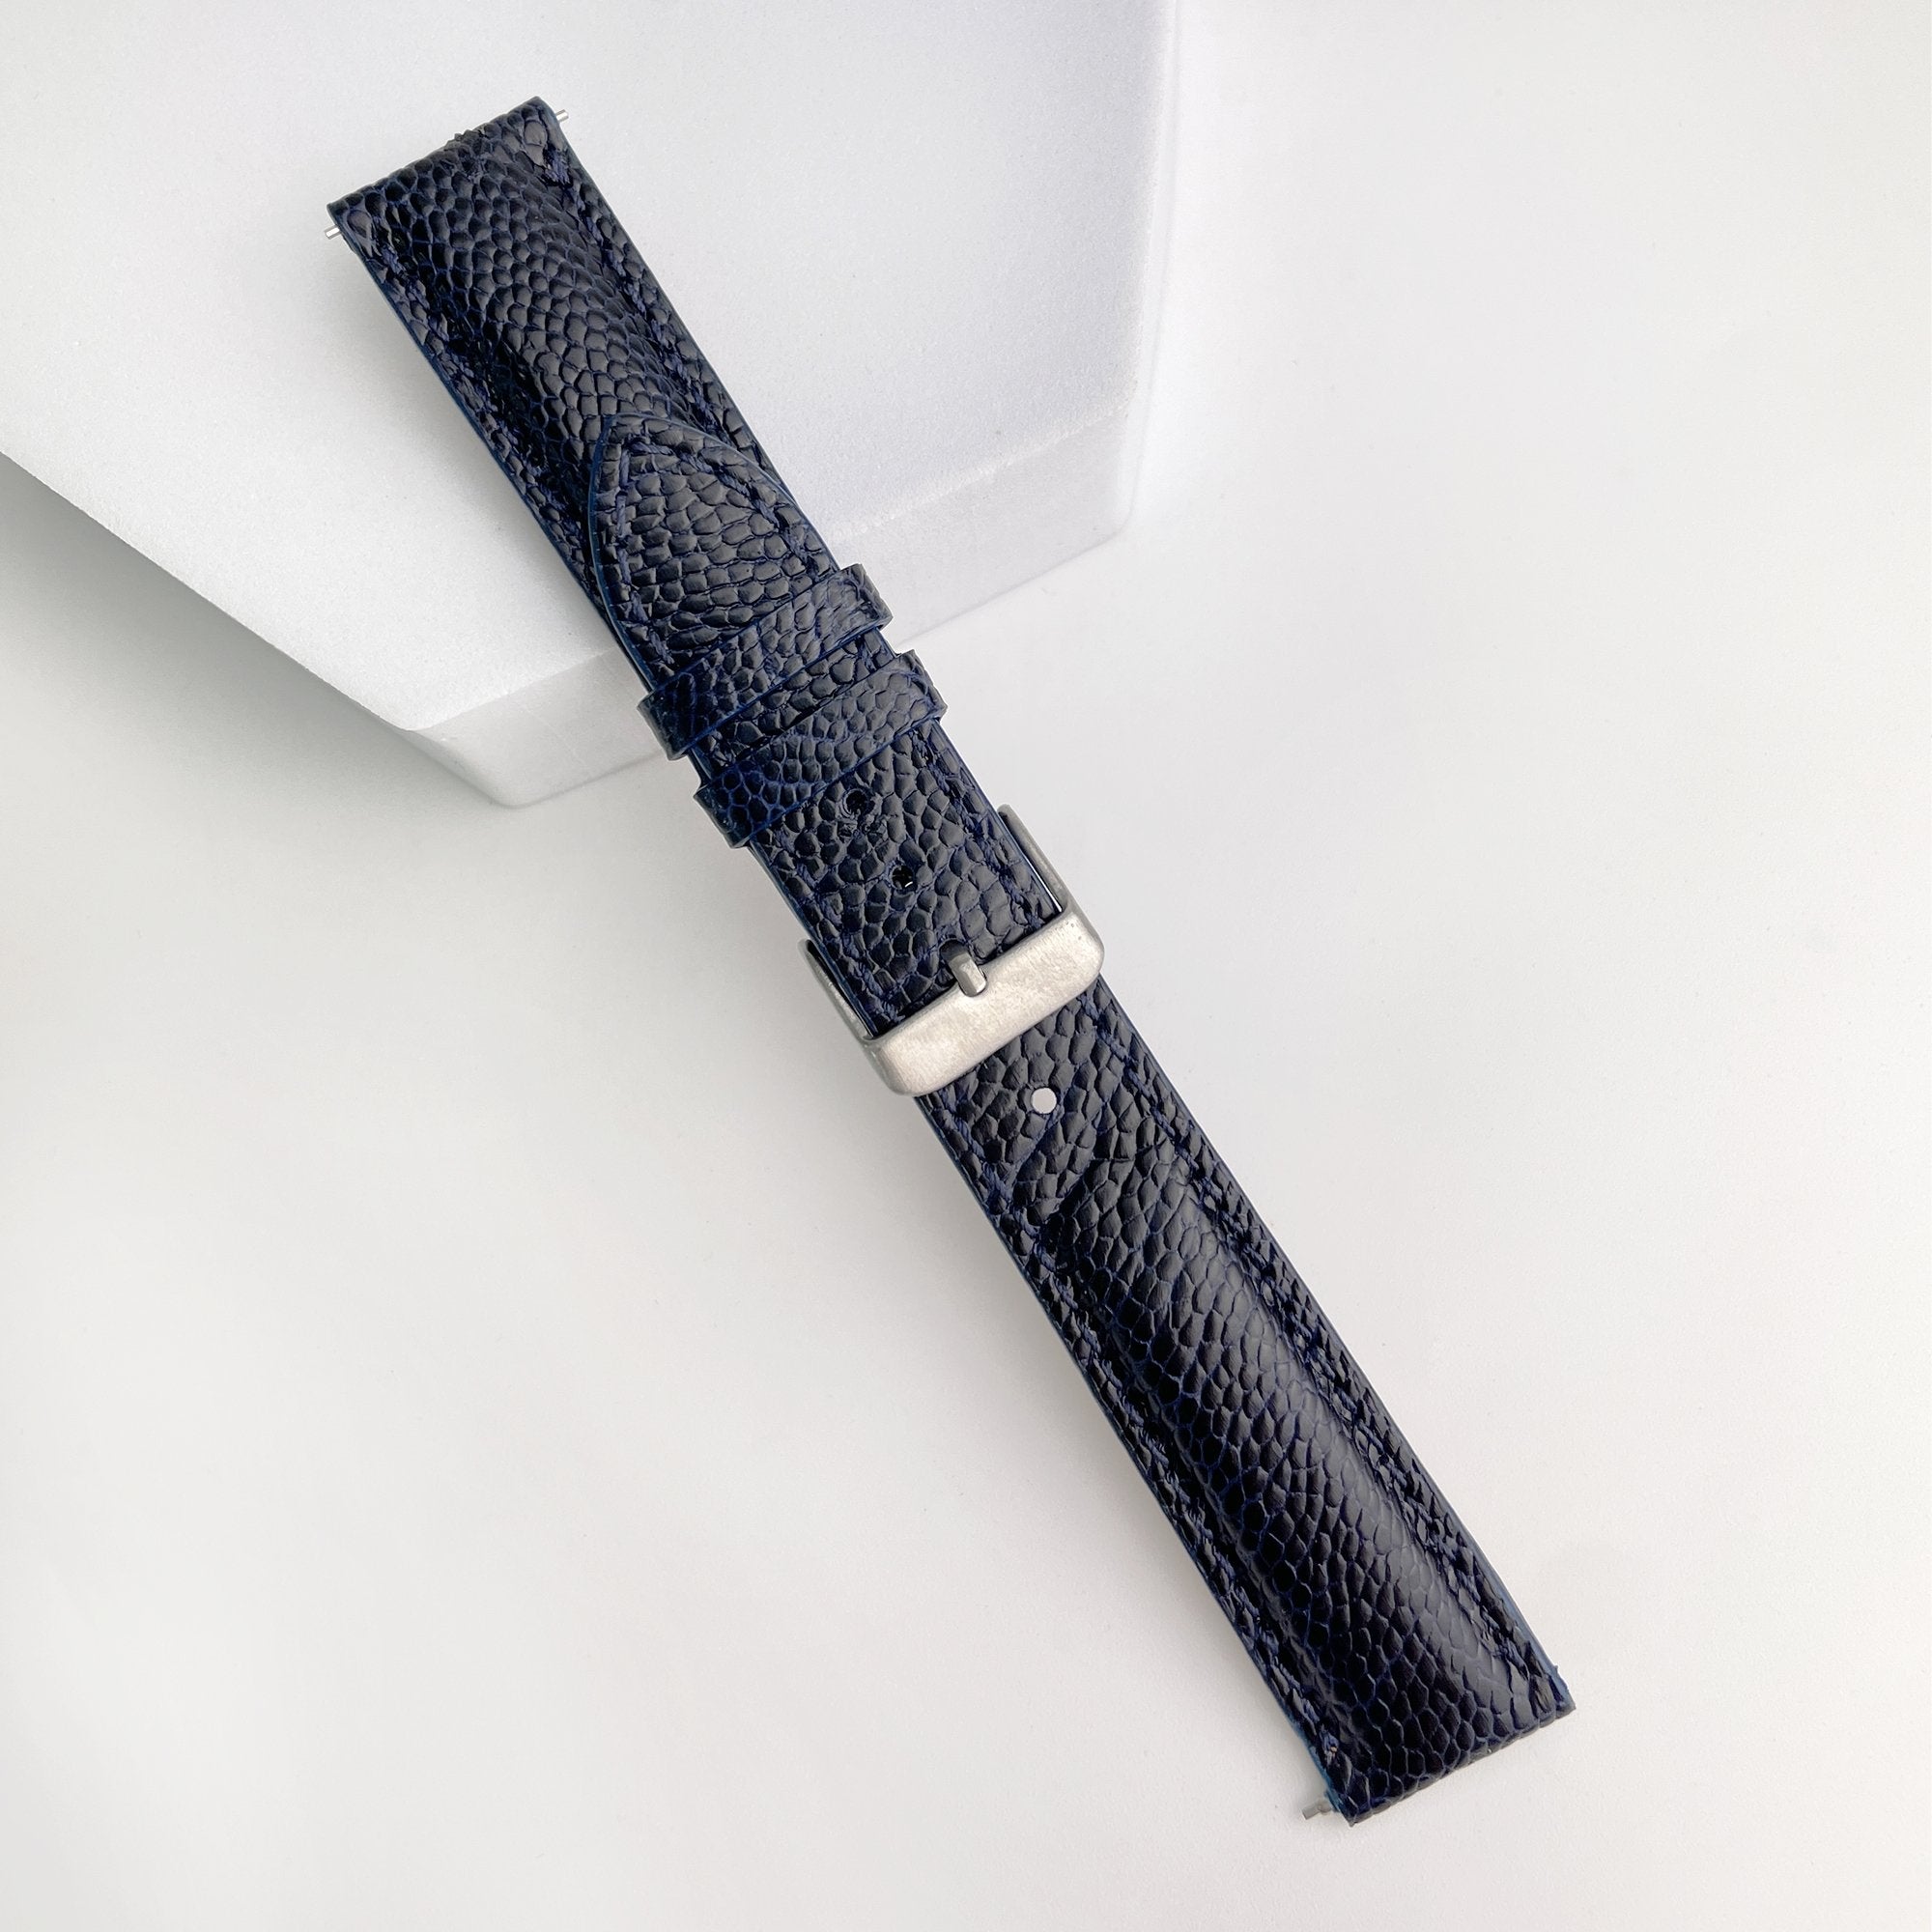 Navy Blue Ostrich Leather Watch Strap Quick Release Replacement Strap | DH-33 - Vinacreations